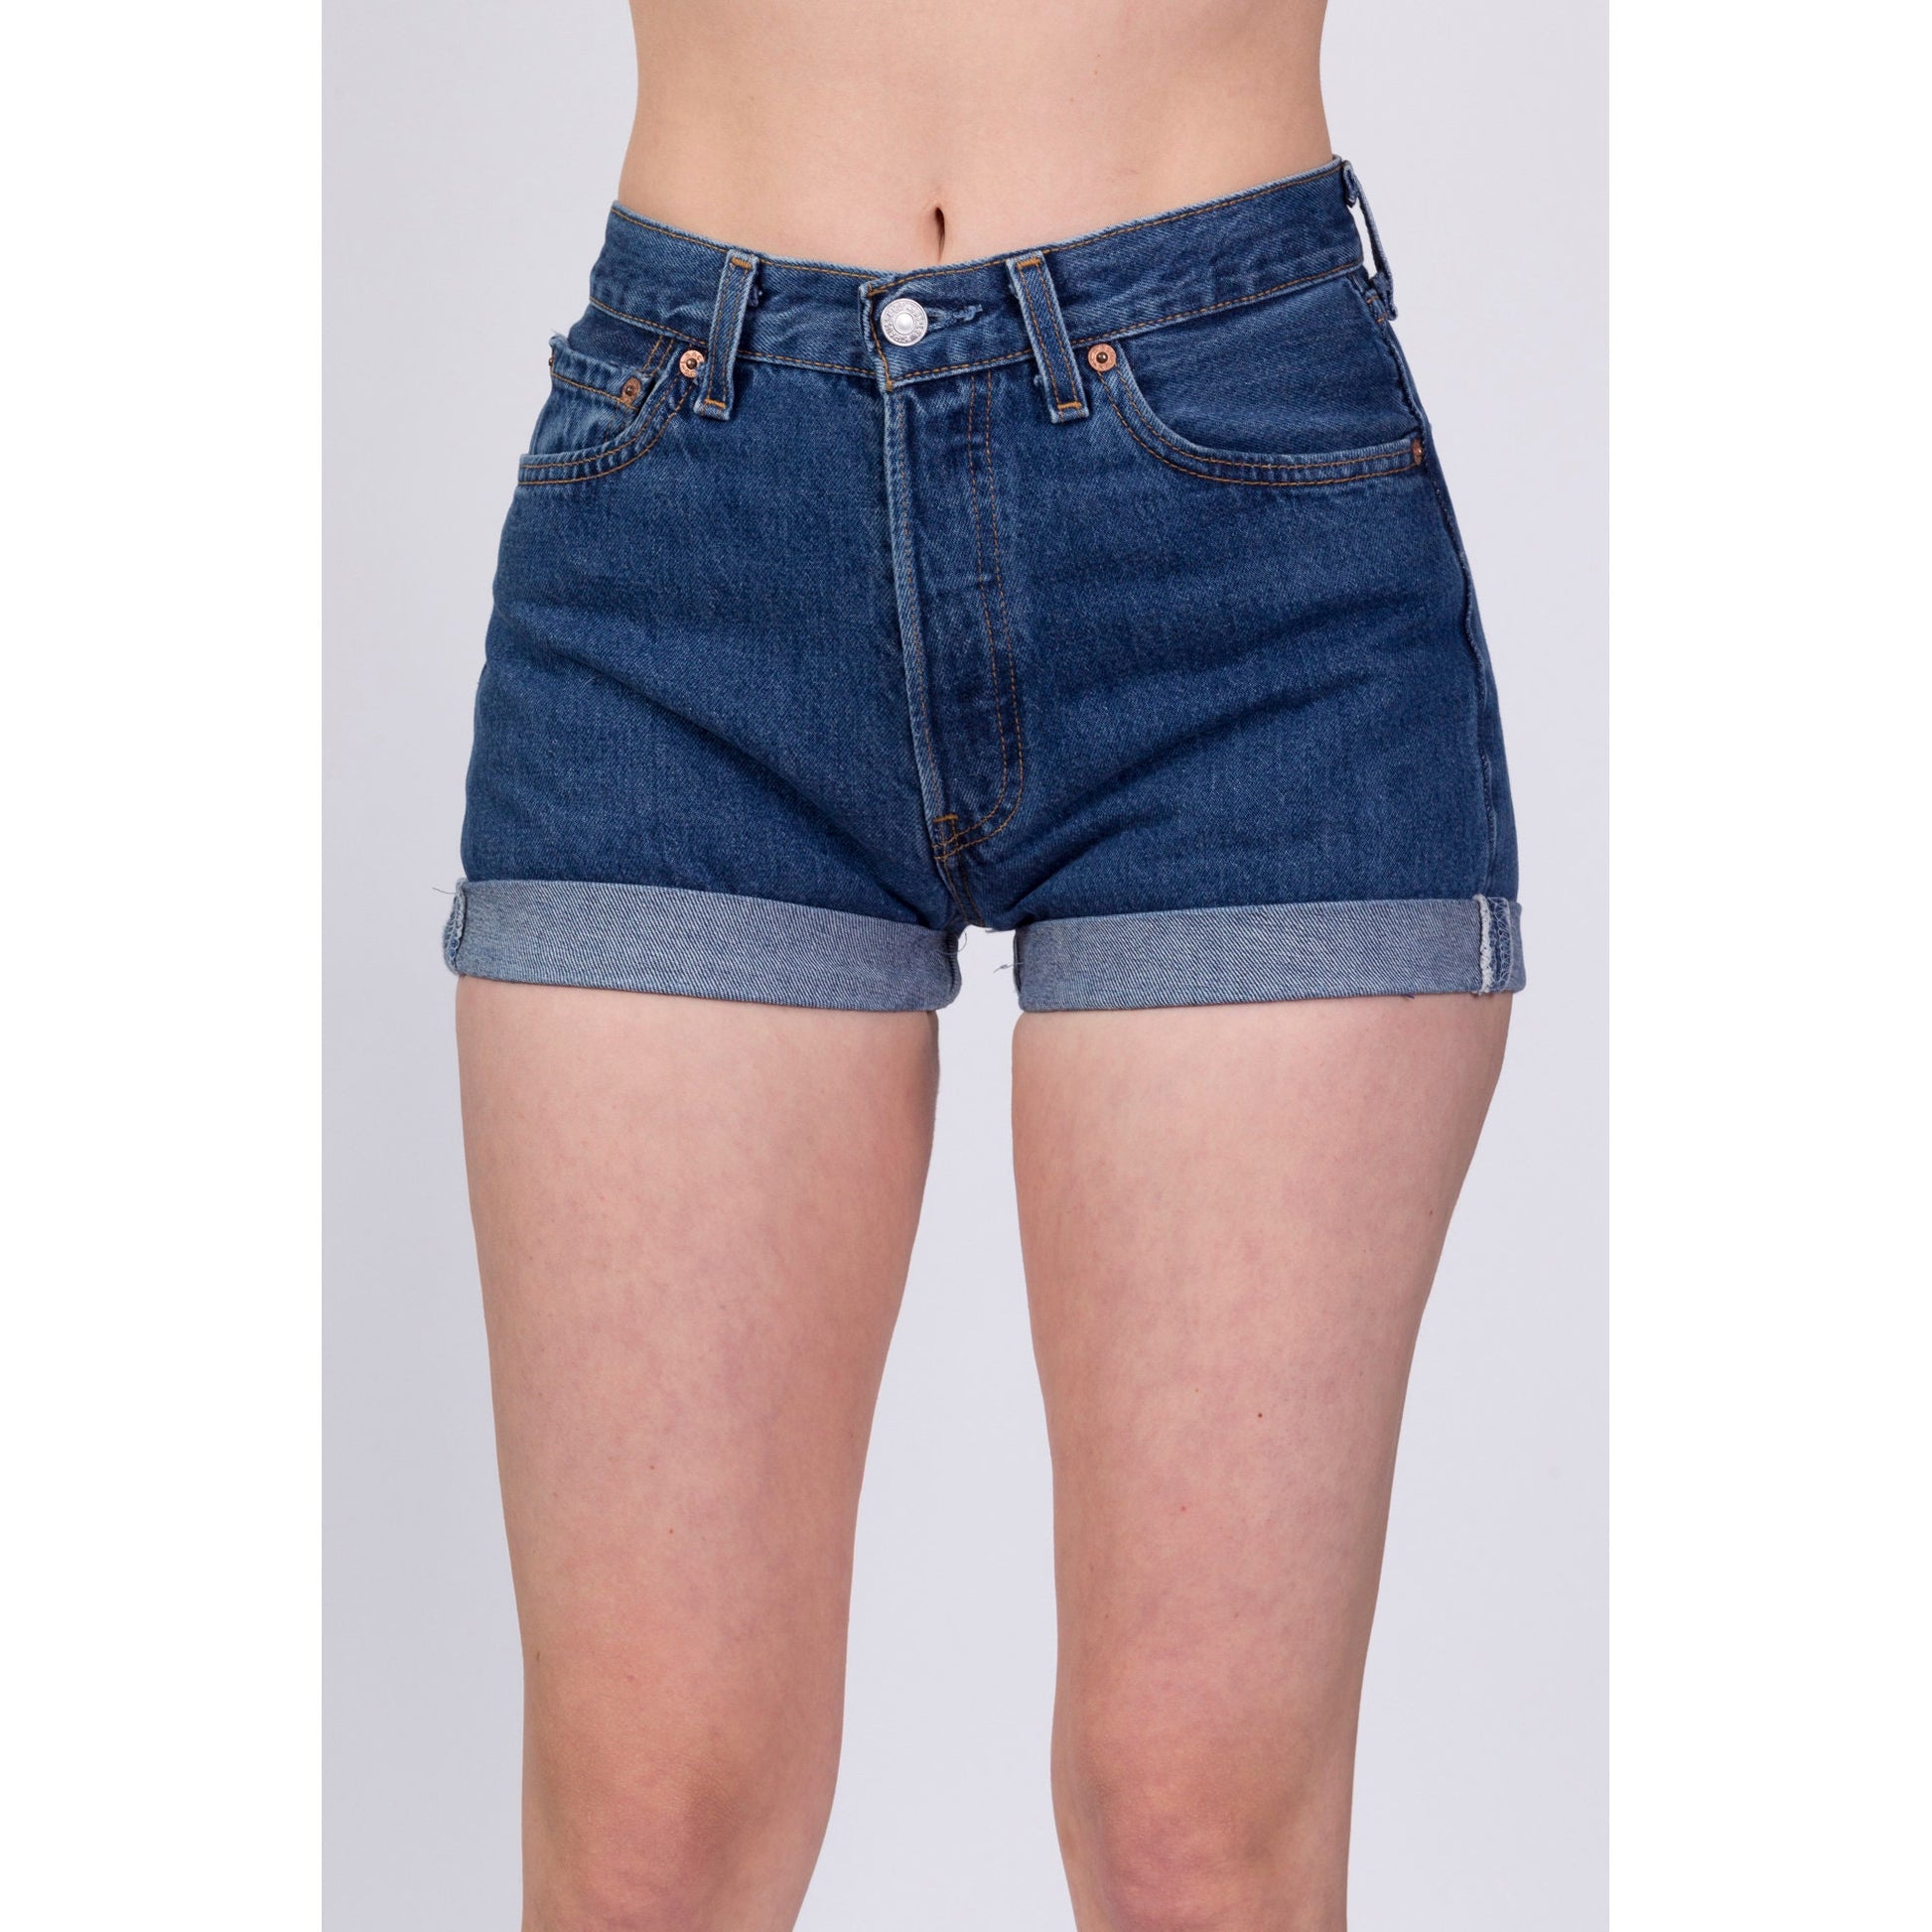 Vintage Levis 501 Cuffed Jean Shorts - Small – Flying Apple Vintage